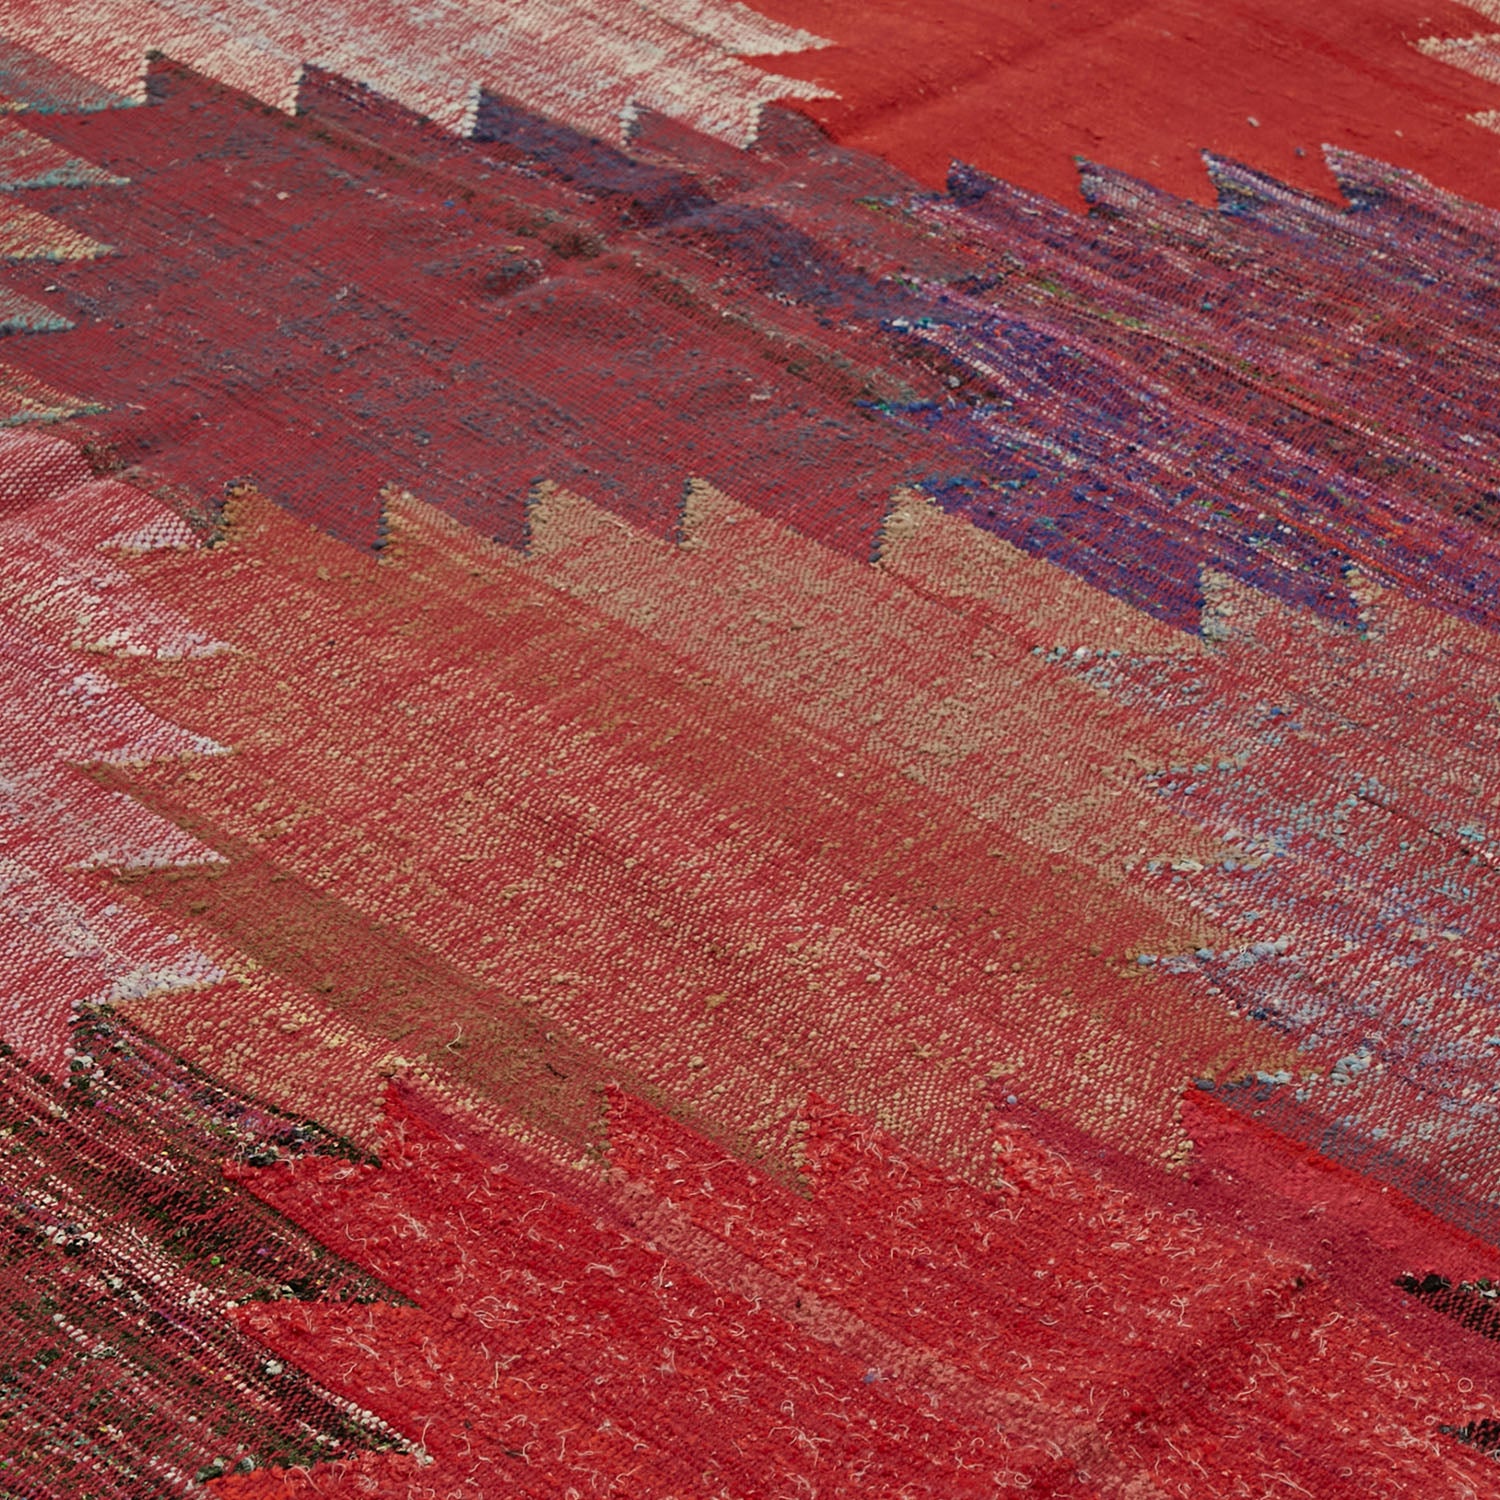 Close-up of a richly textured woven fabric in red hues.